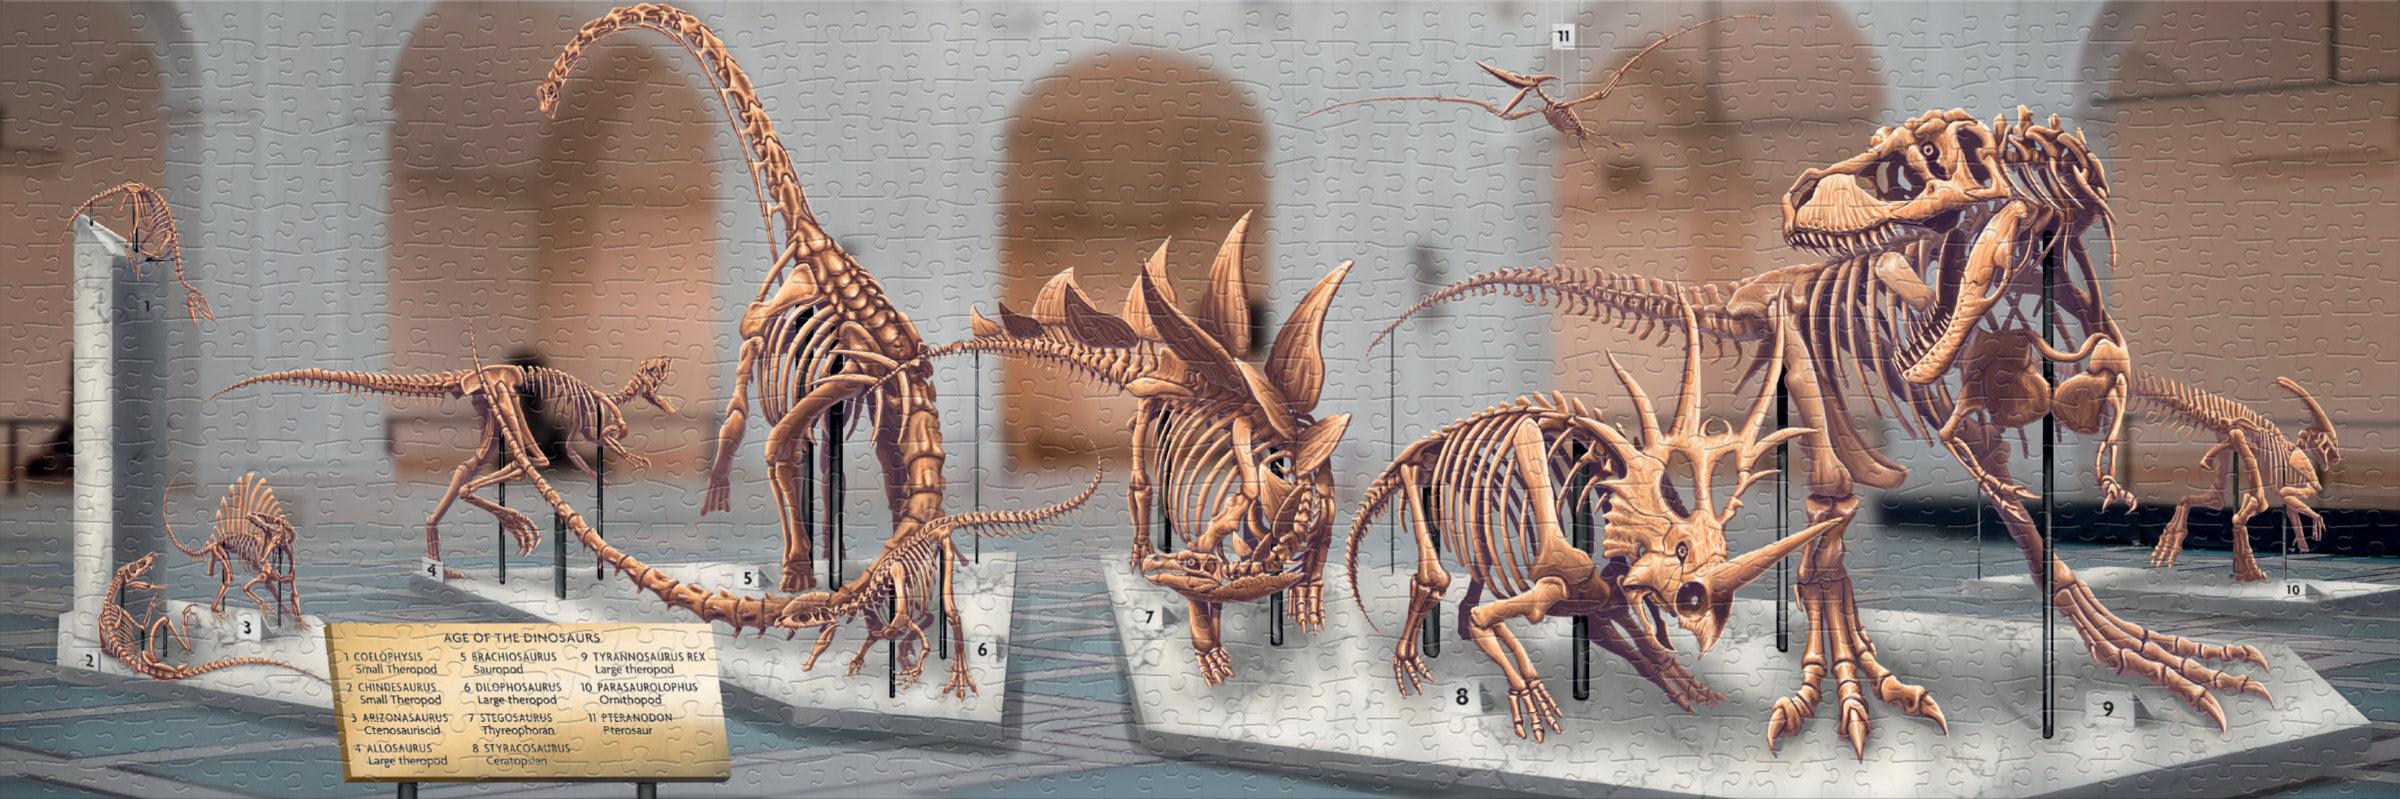 Product photo of Age of the Dinosaurs Jigsaw Puzzle, a novelty gift manufactured by The Unemployed Philosophers Guild.